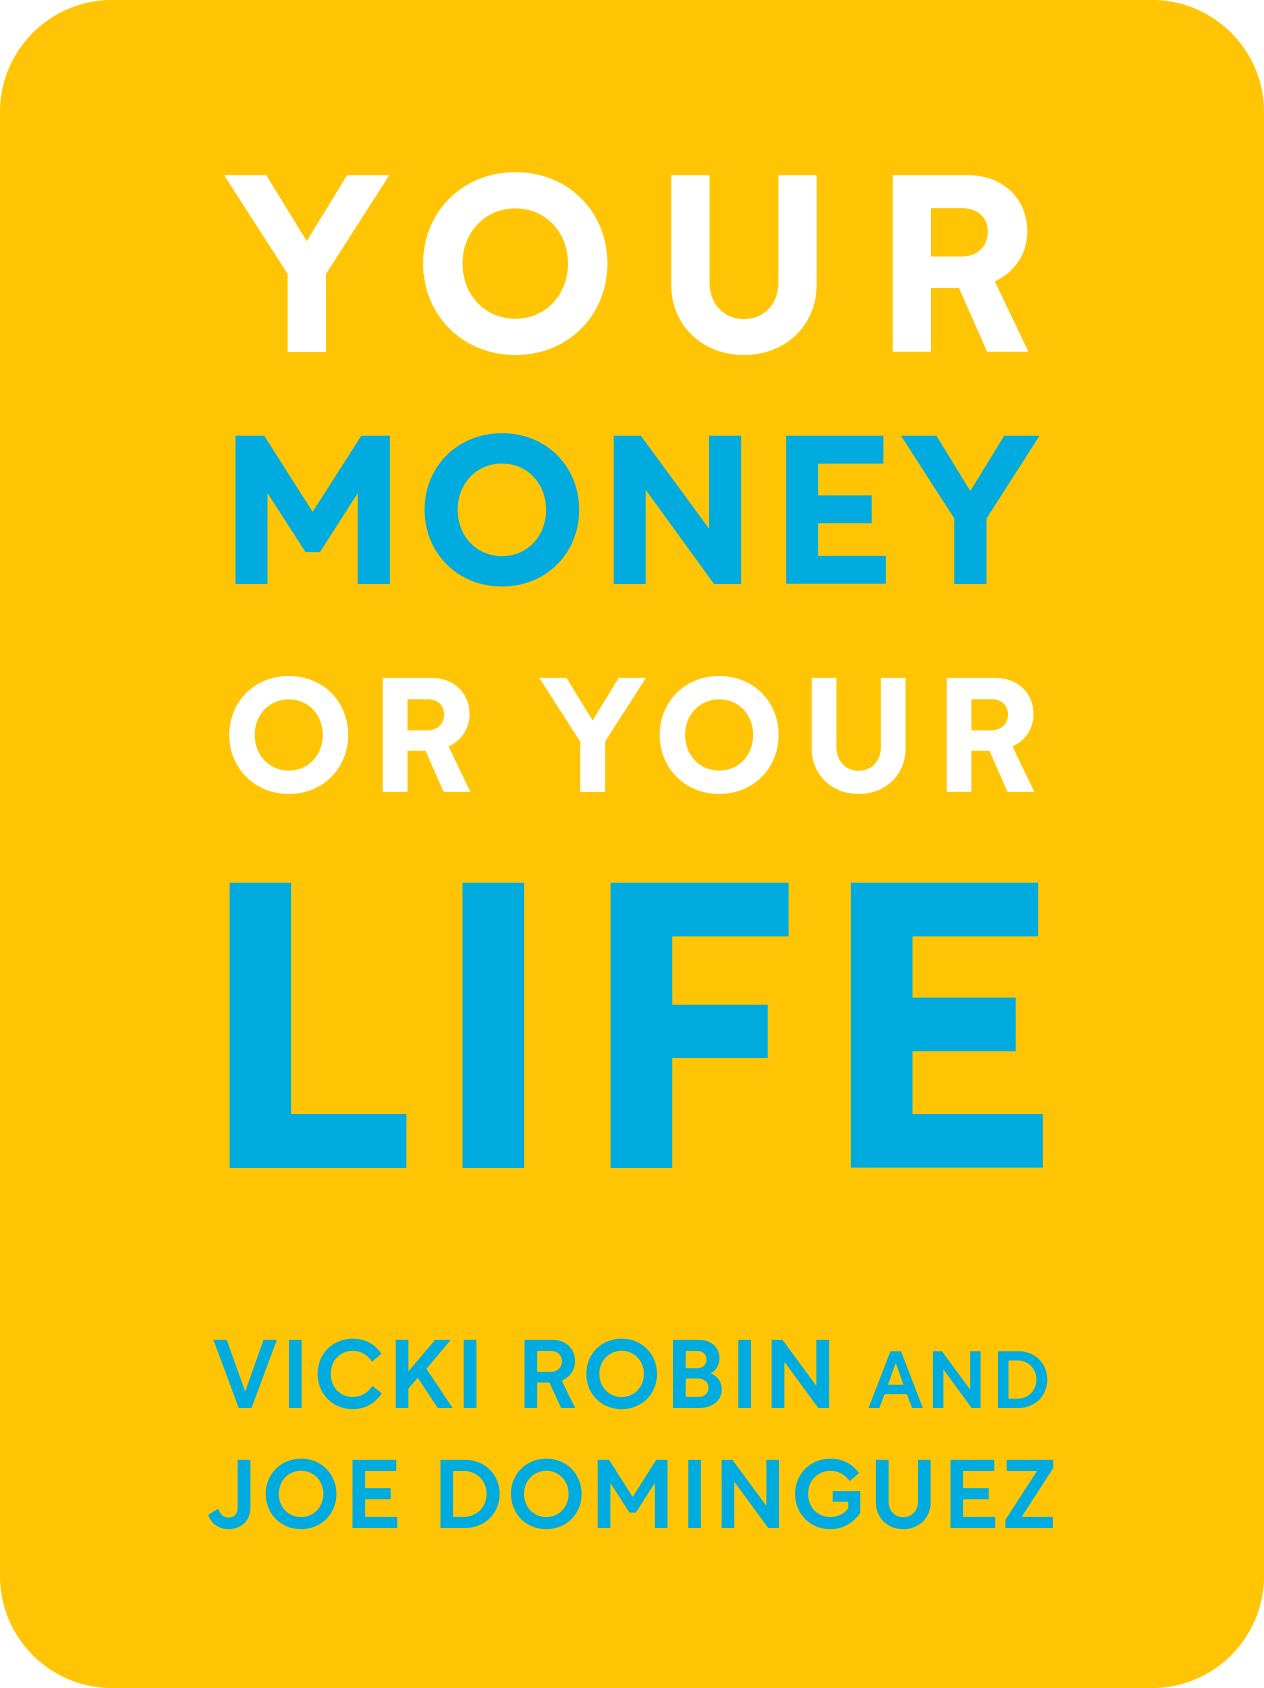 A Comprehensive Guide to Financial Independence: A Review of Vicki Robin's "Your Money or Your Life"